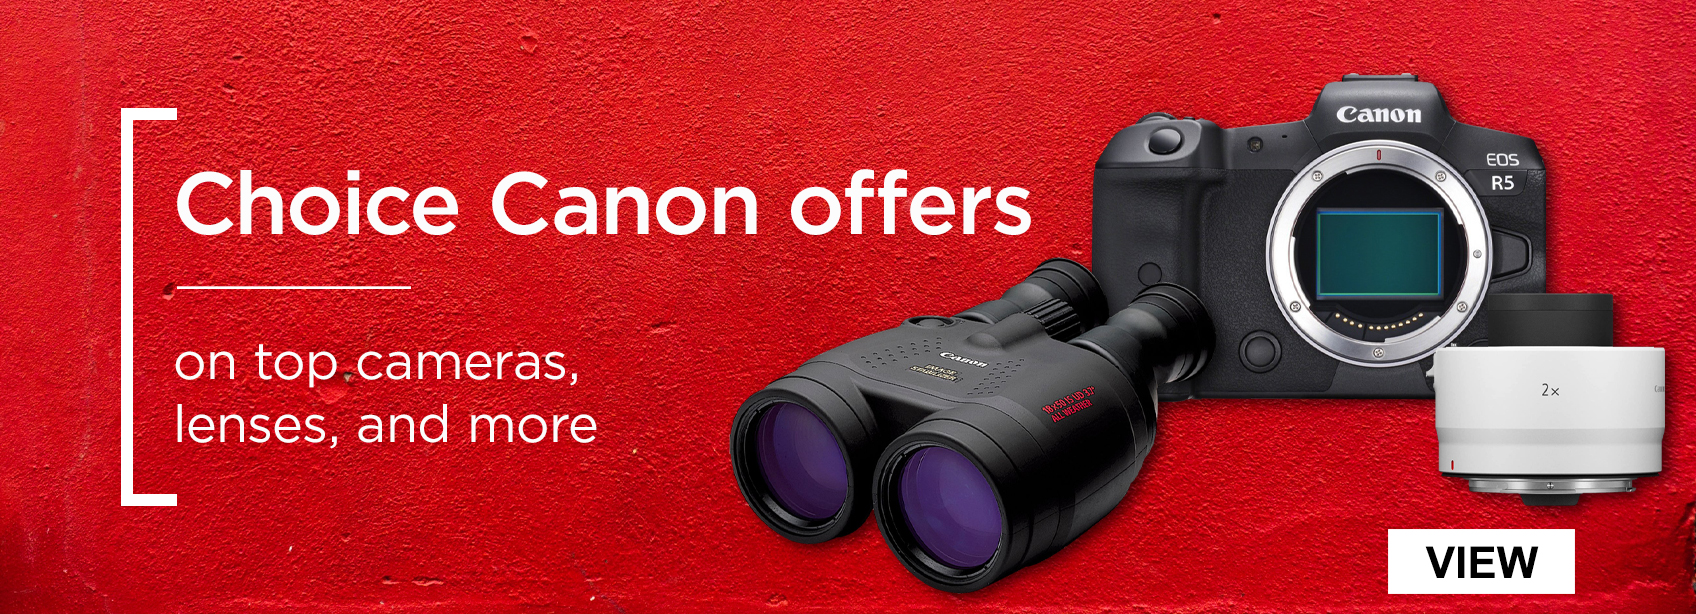 Choice Canon offers on top cameras, lenses, and more